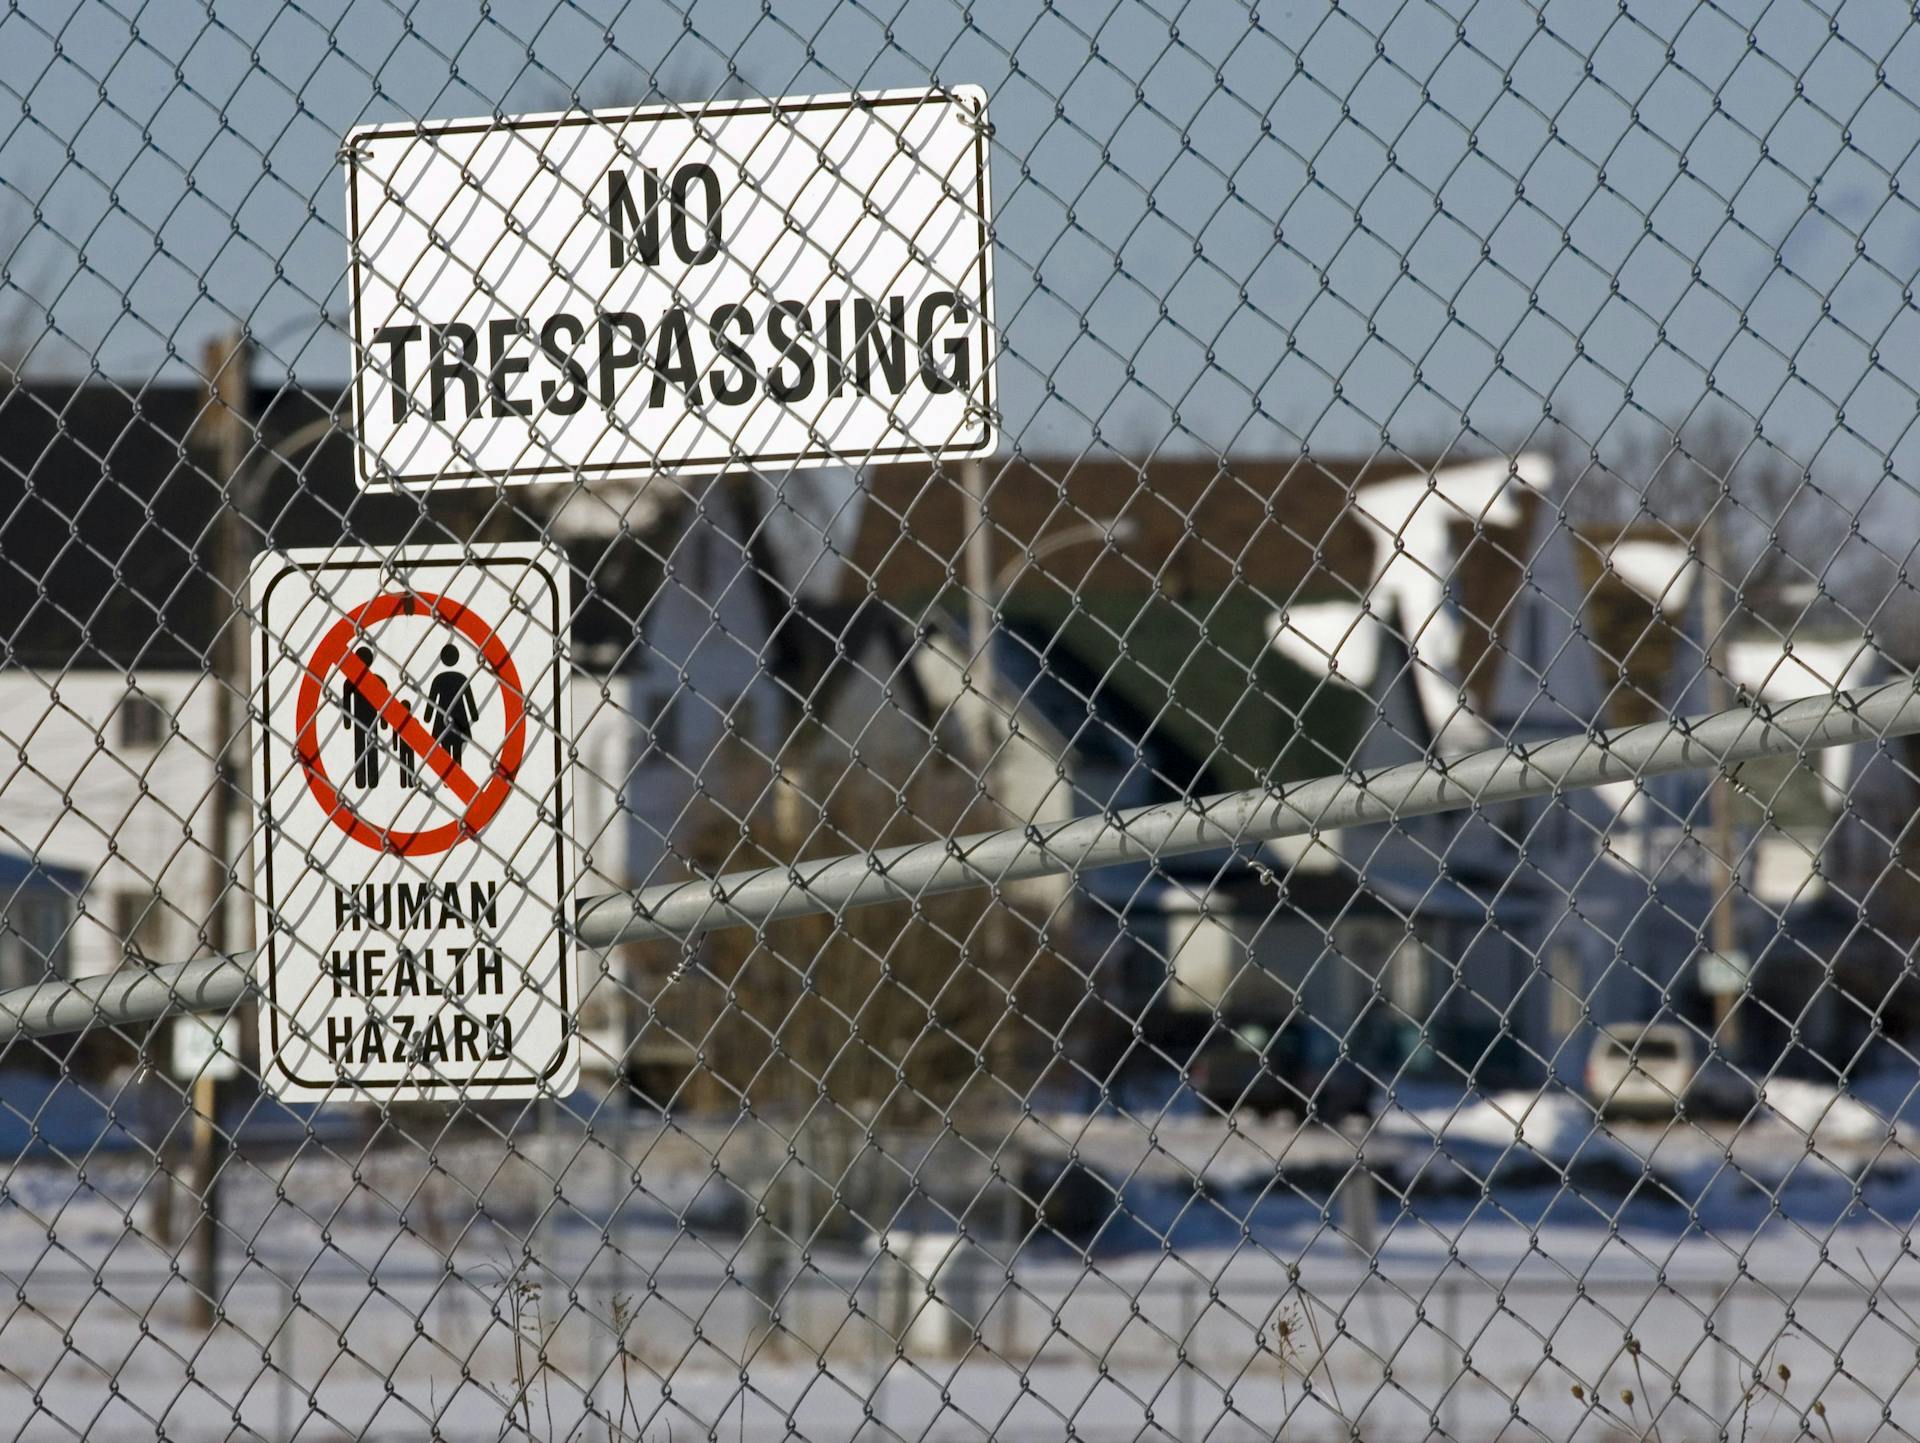 Chain-link fence with 'no trespassing' and 'human health hazard' signs